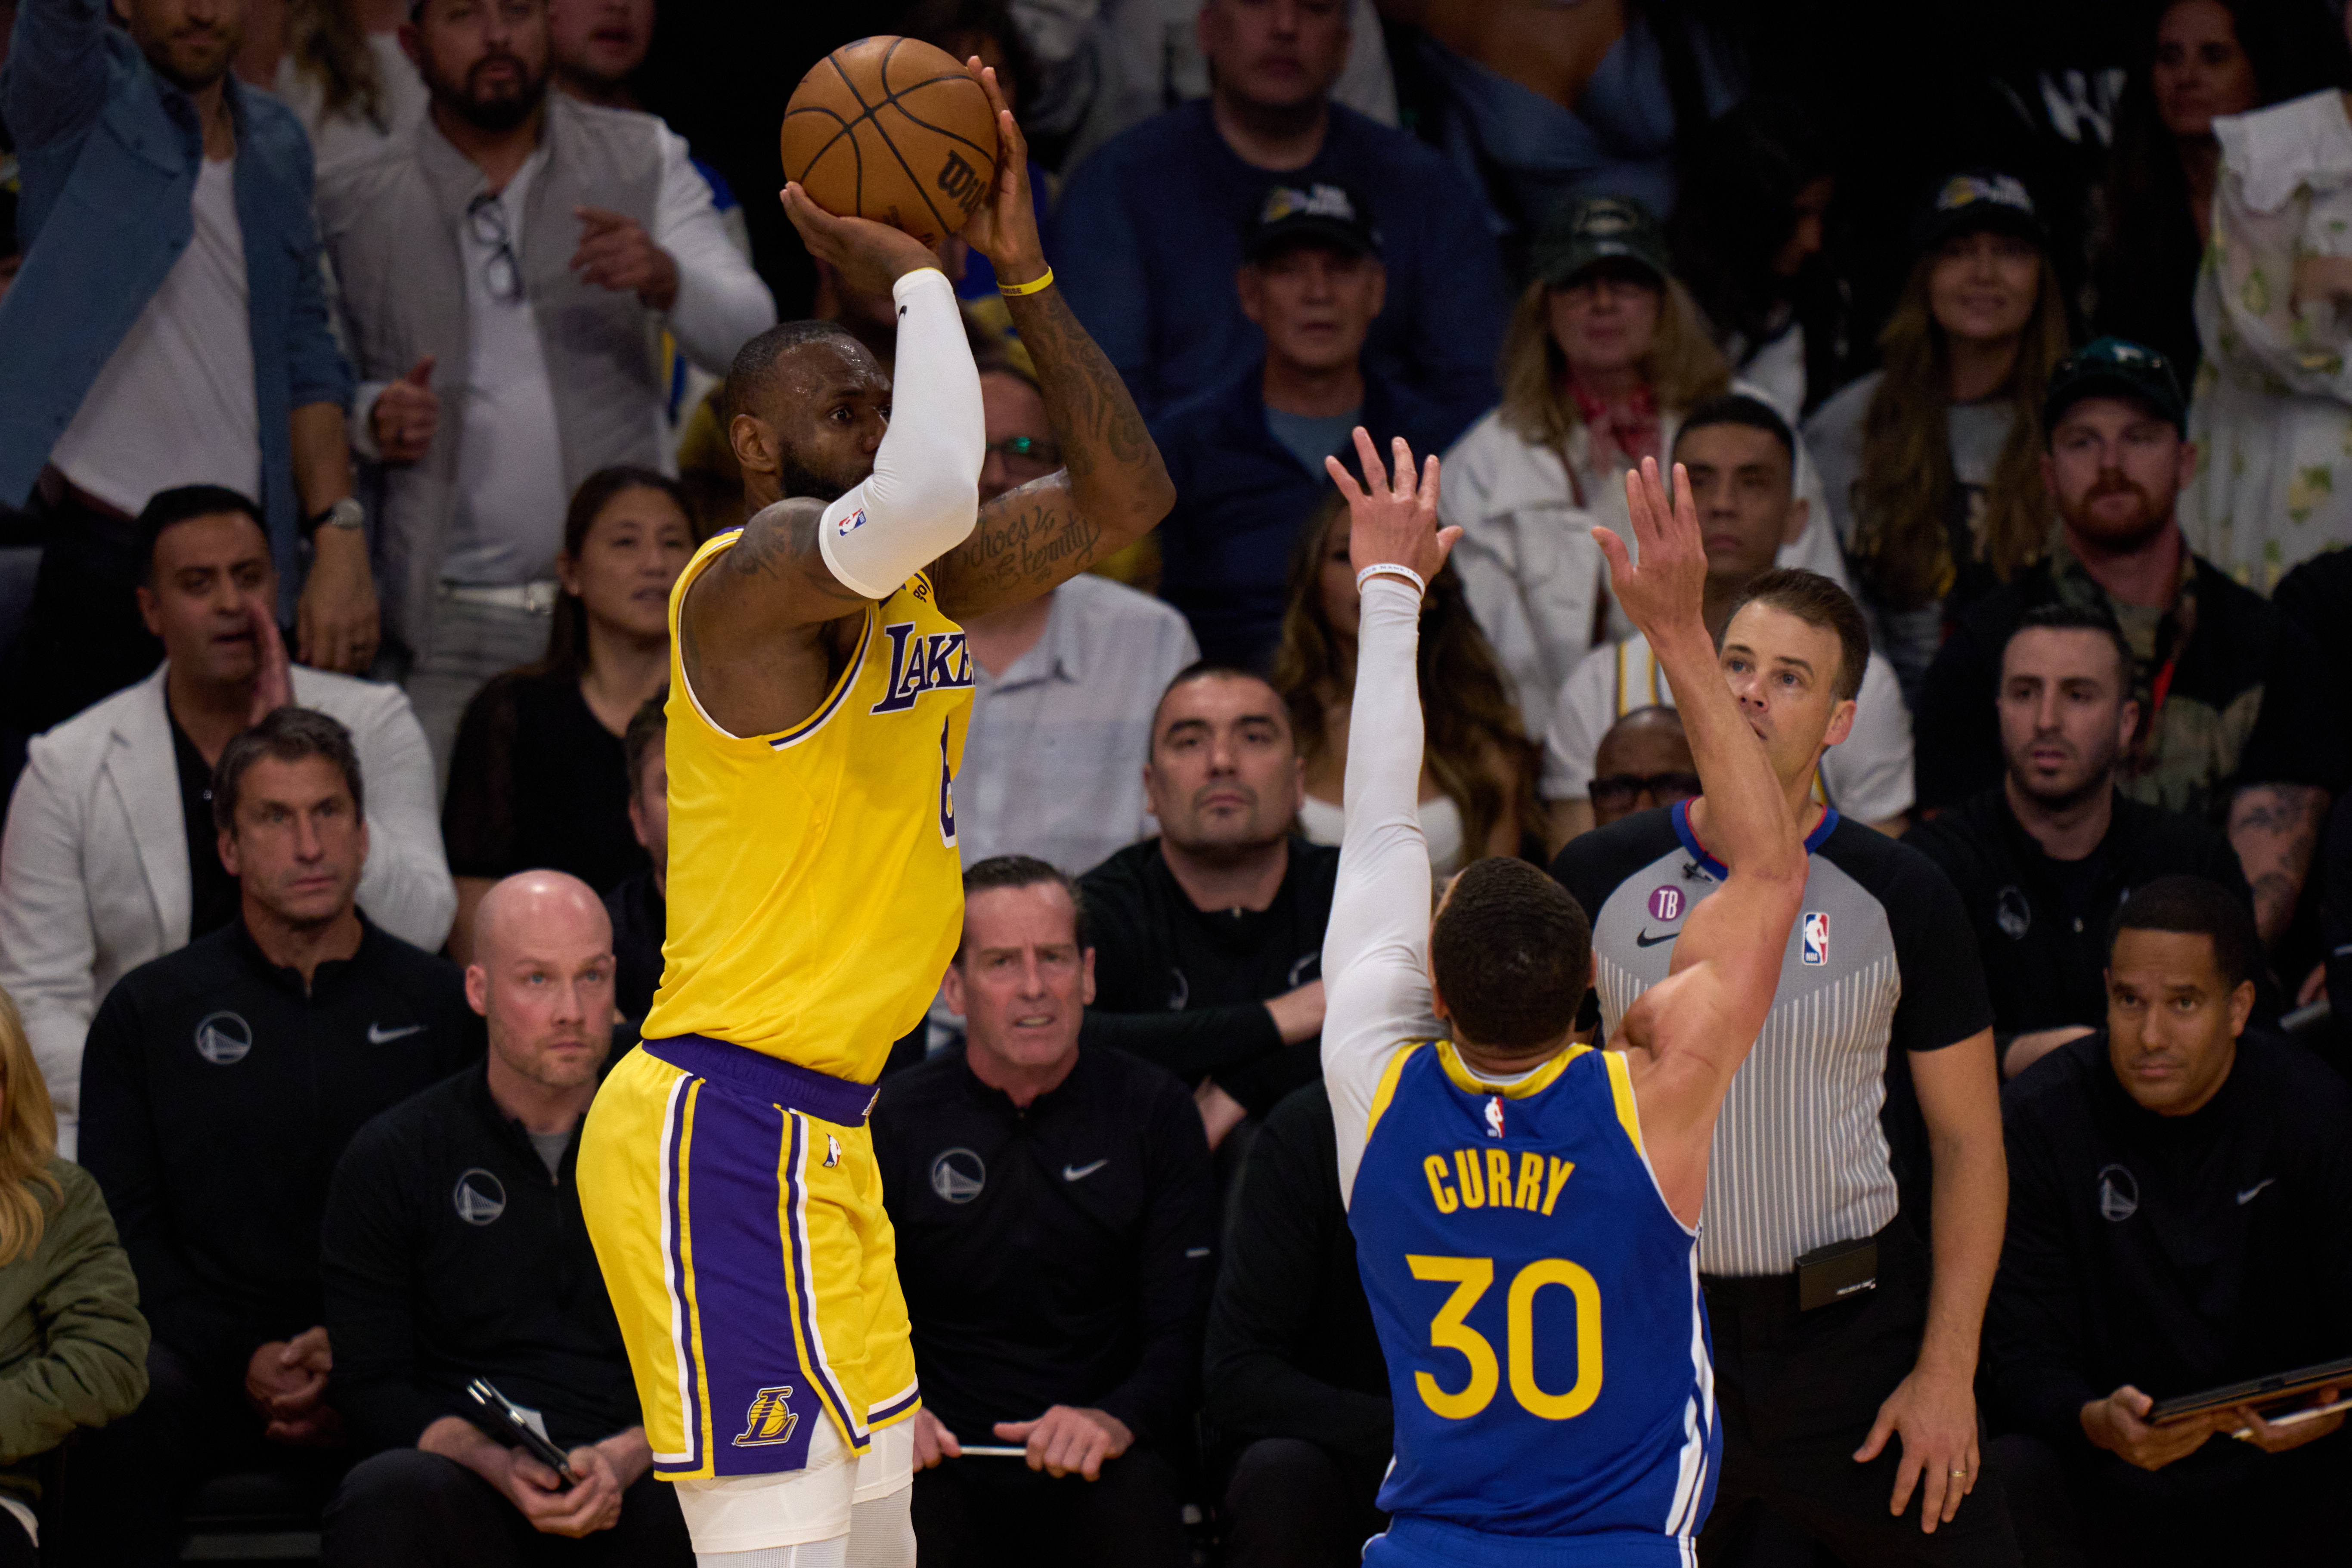 NBA Playoffs - Los Angeles Lakers at Golden State Warriors